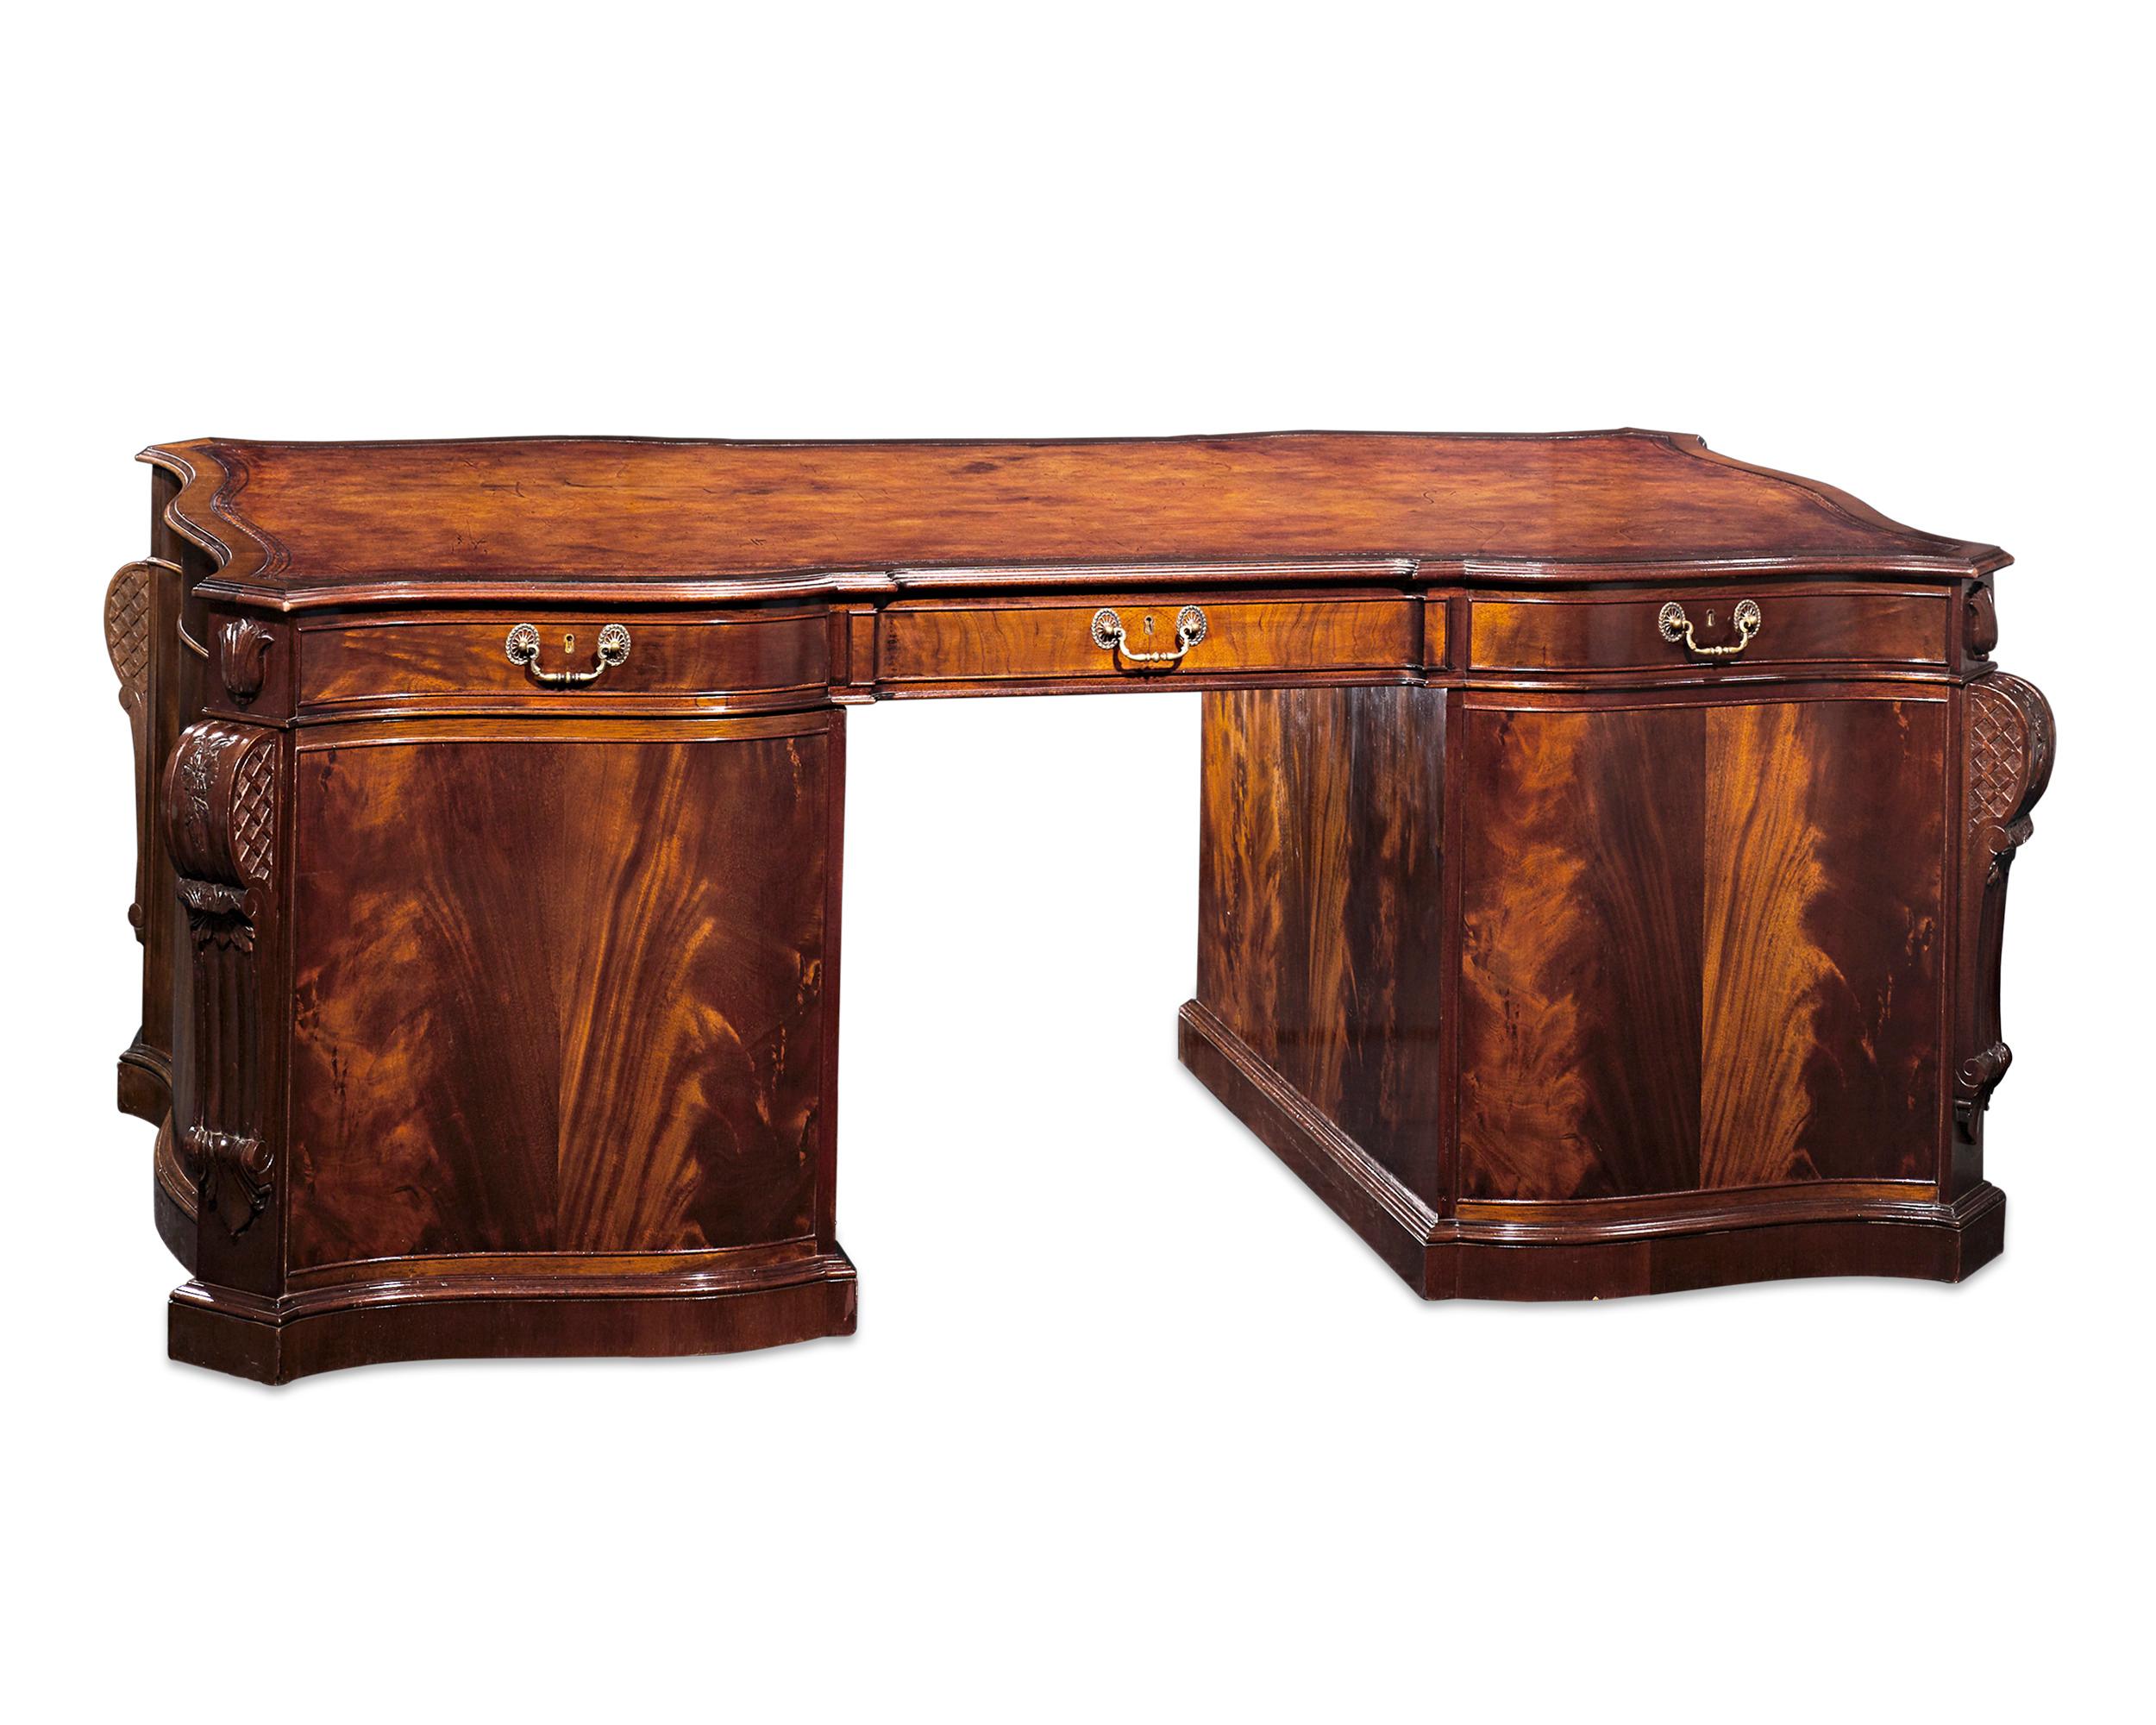 Carved English Chippendale Style Serpentine Partner's Desk